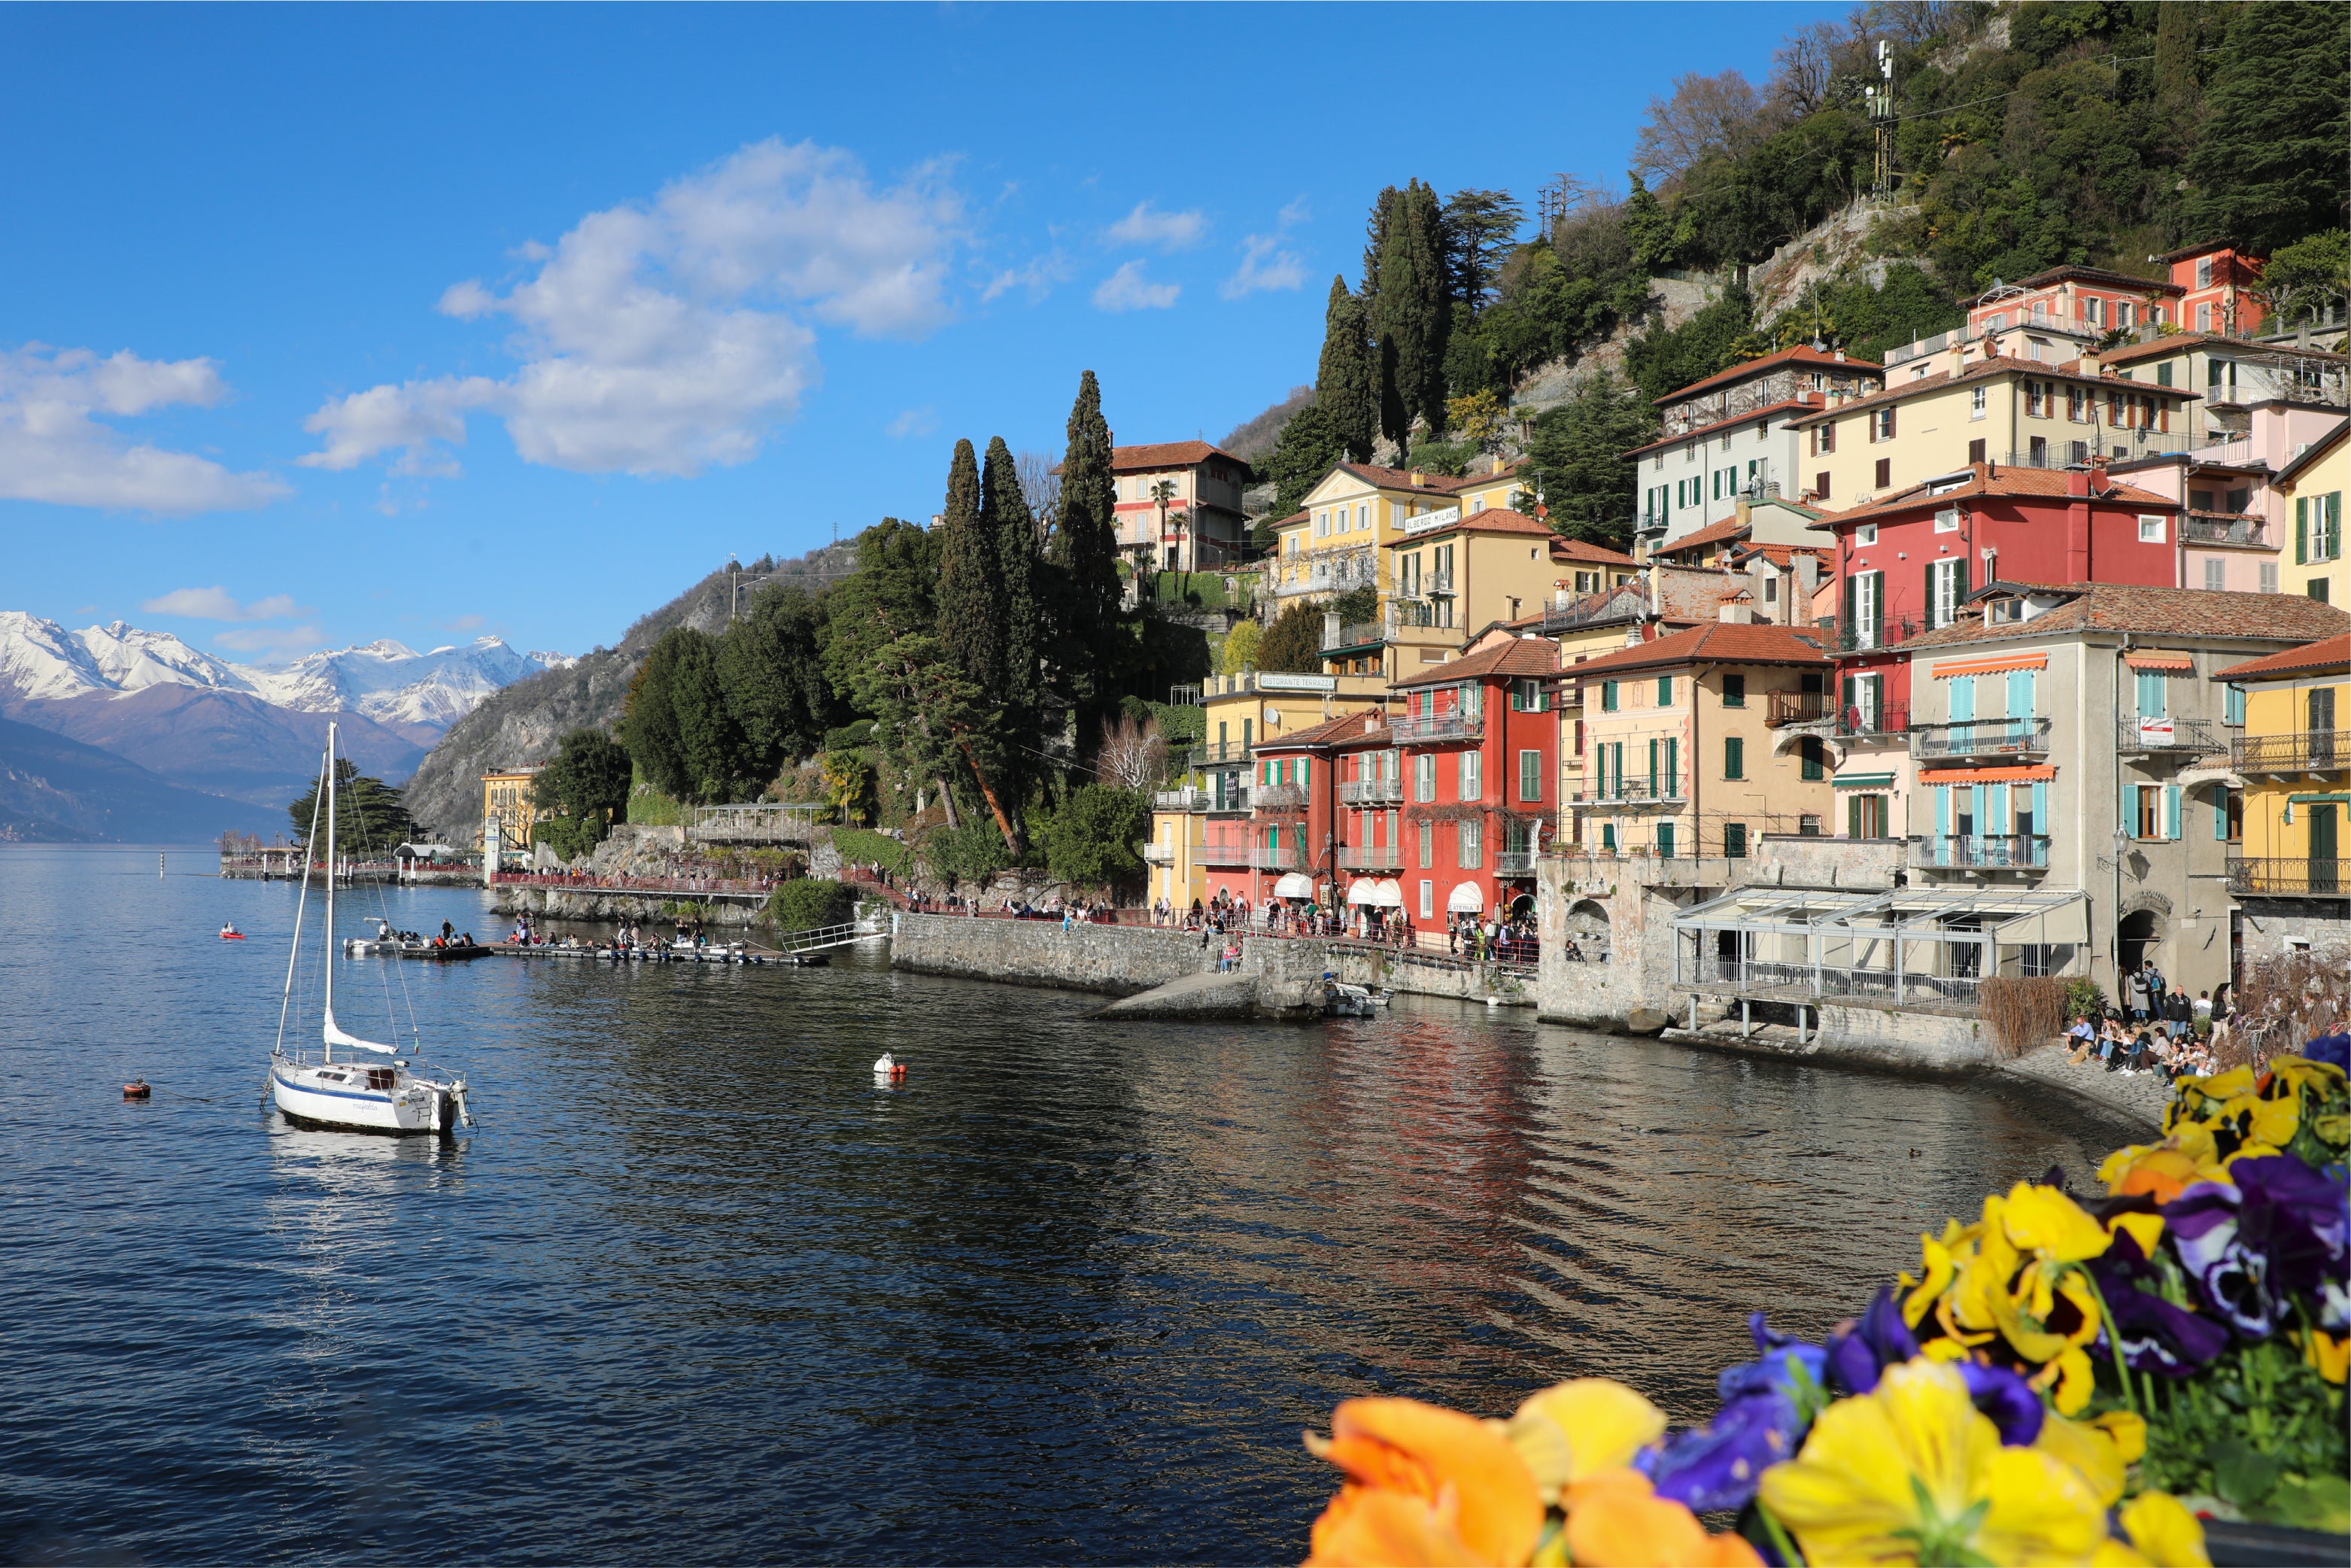 What To Do in Varenna